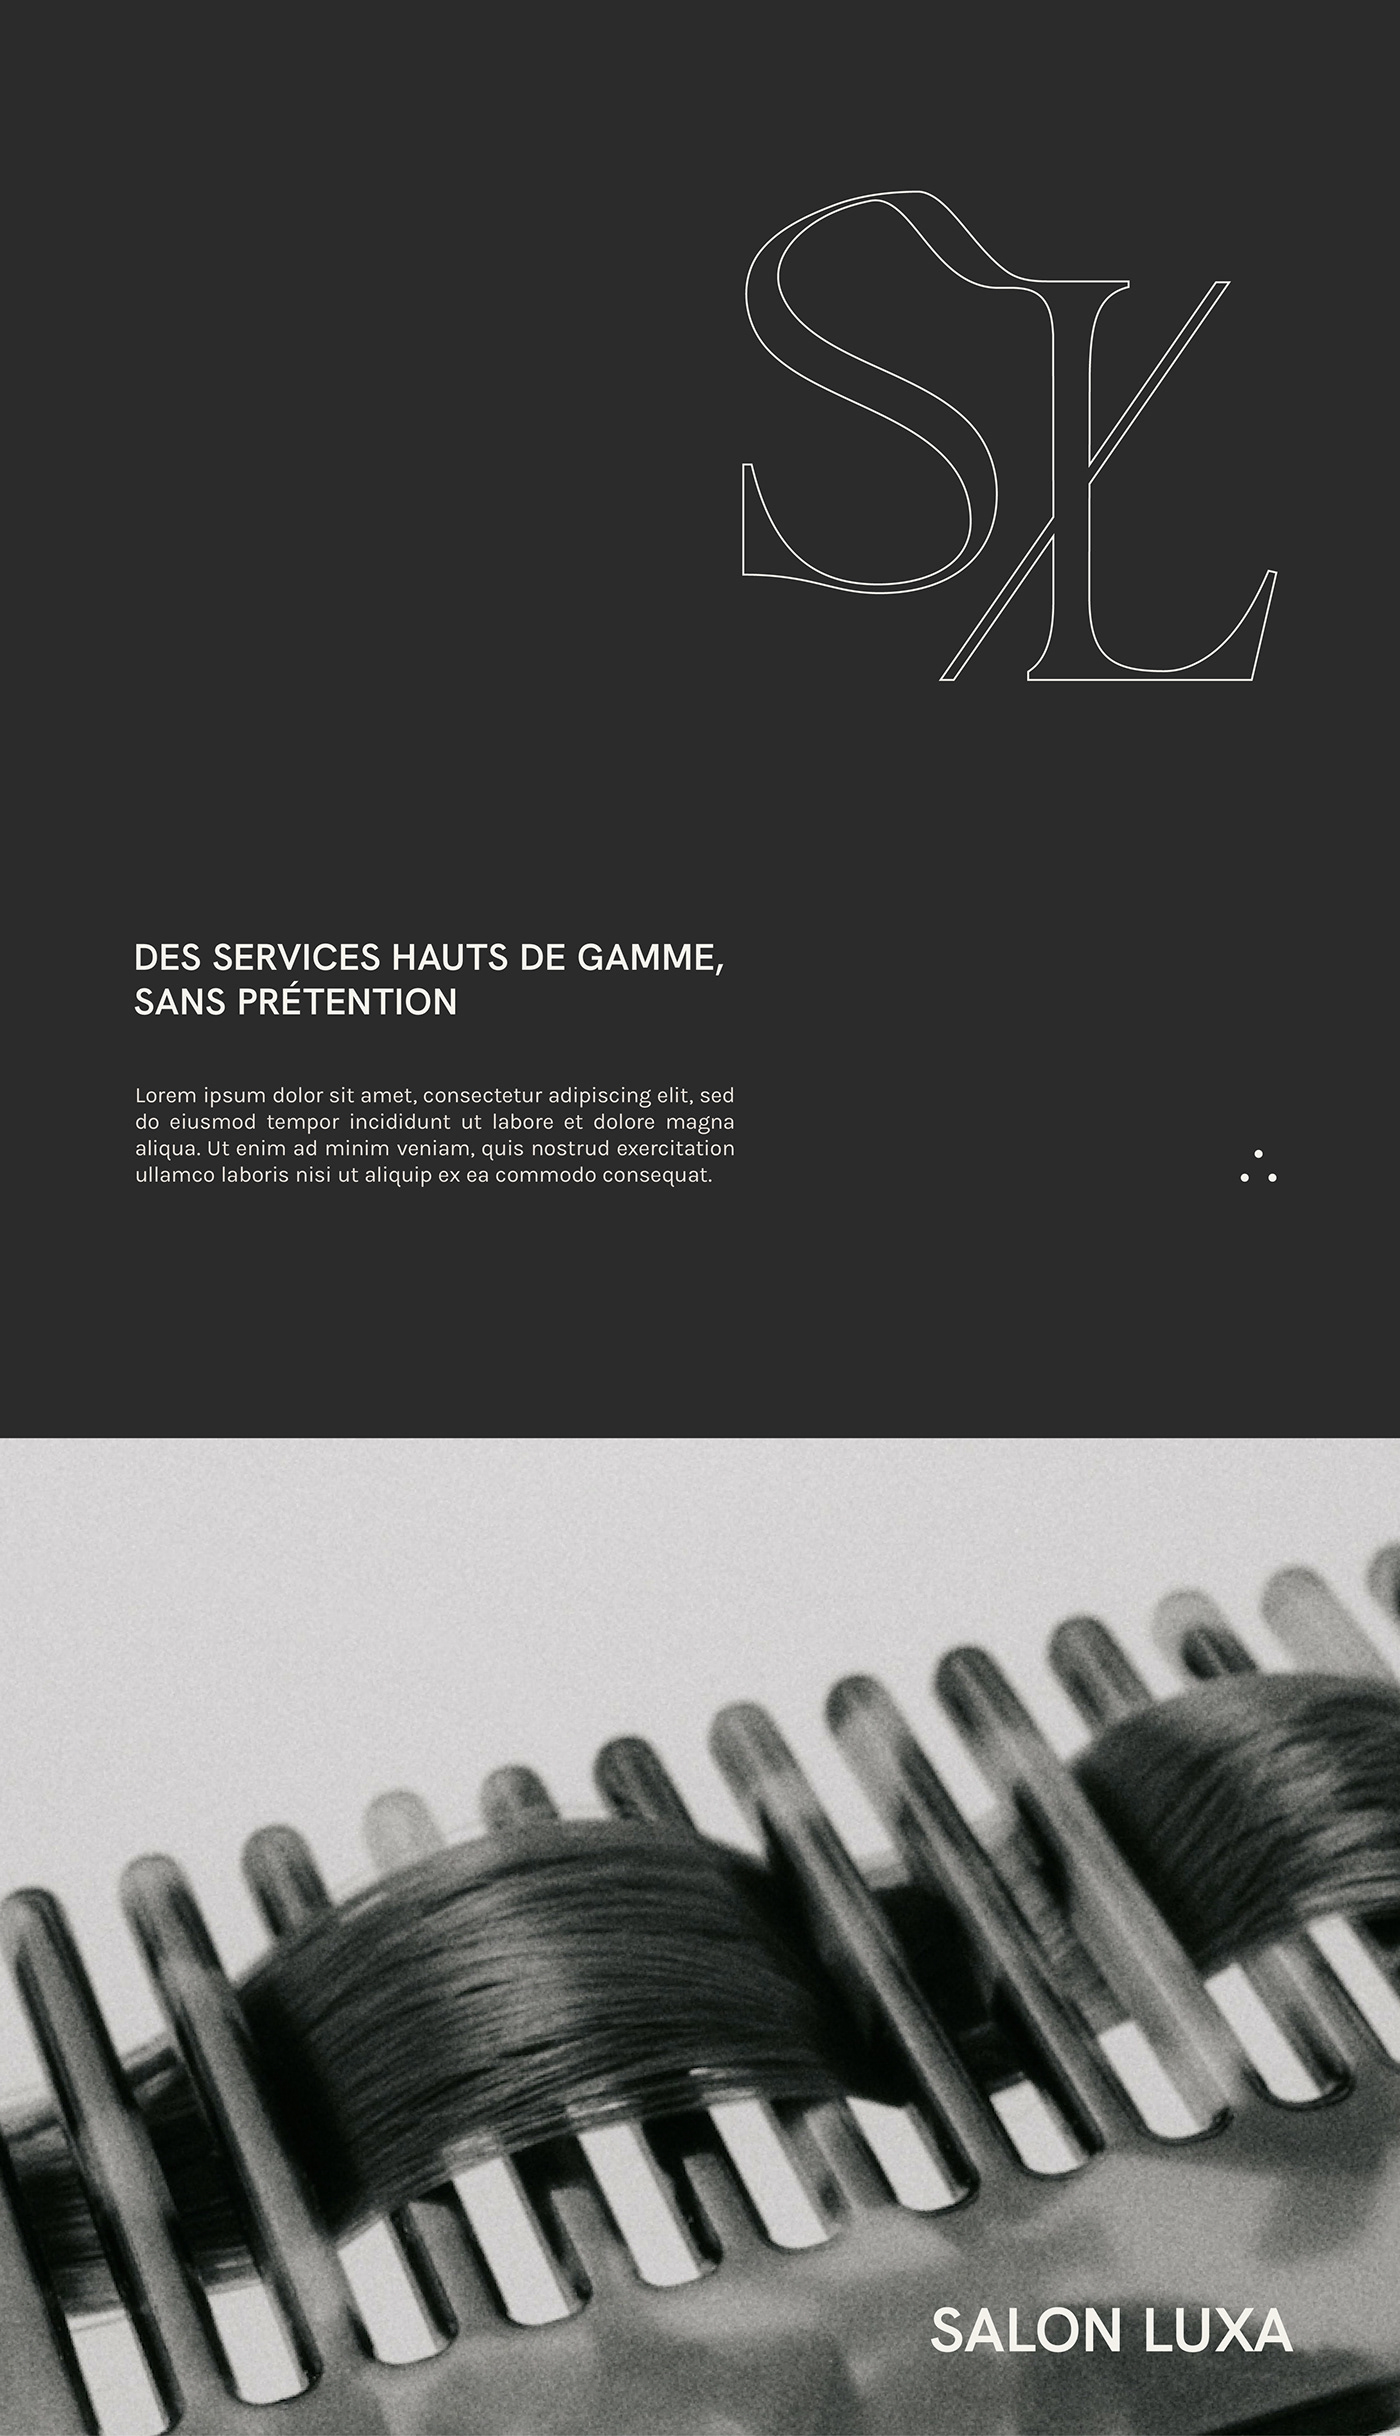 sub logo variation and editorial design for a hairdresser based in Montreal